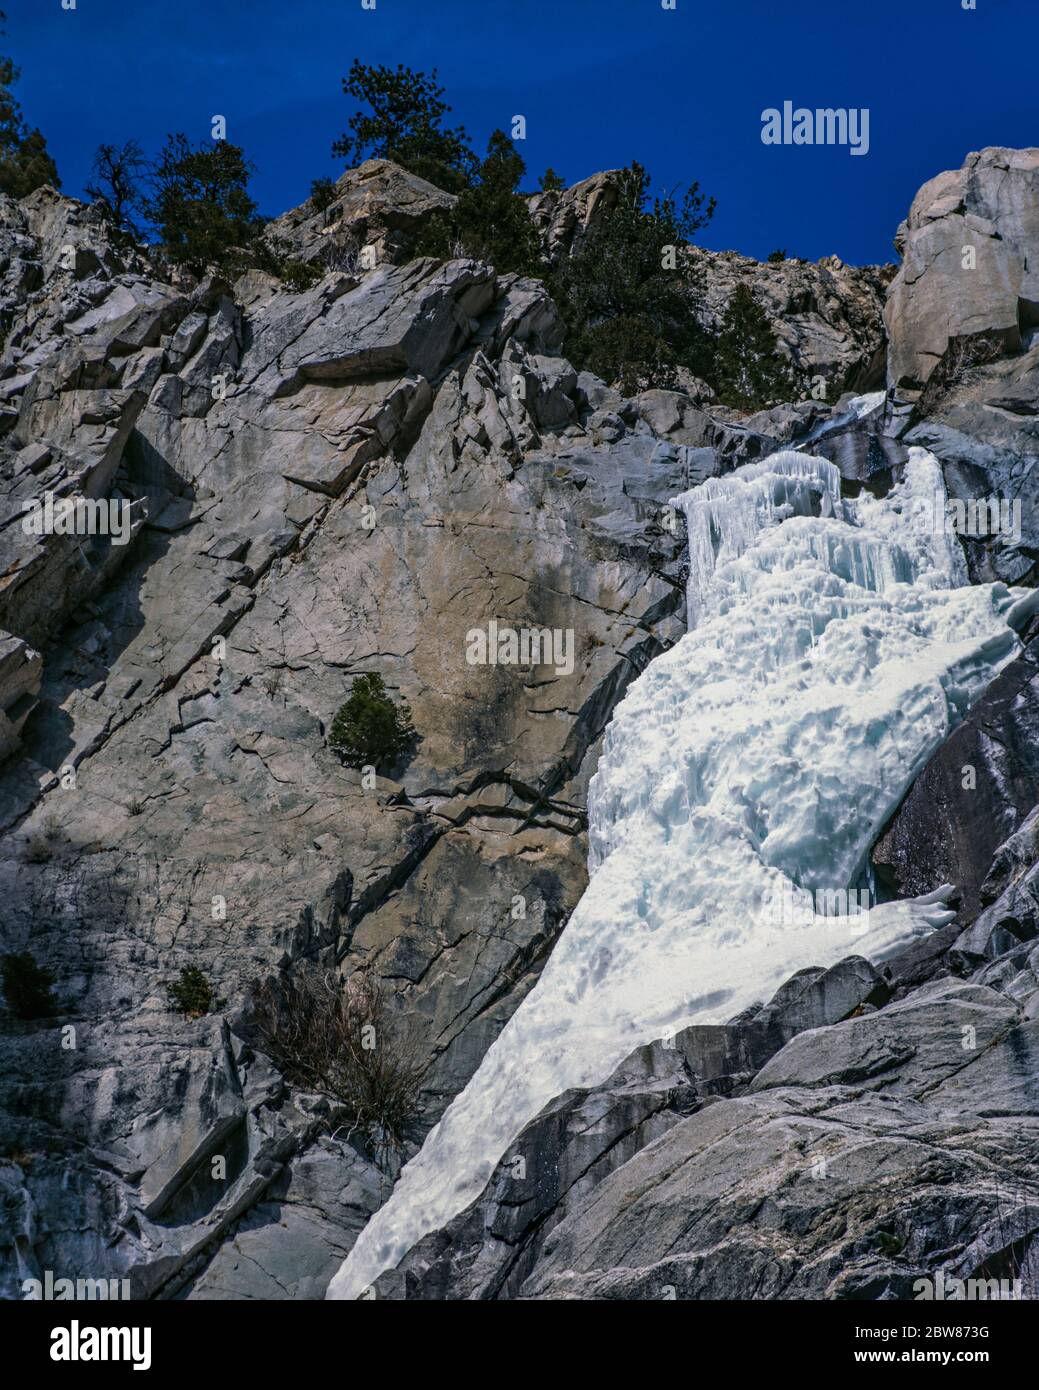 Agnes Vaille Falls, Mostly Frozen, Photographed from Below on 4X5 Ektachrome E100 Slide Film Stock Photo